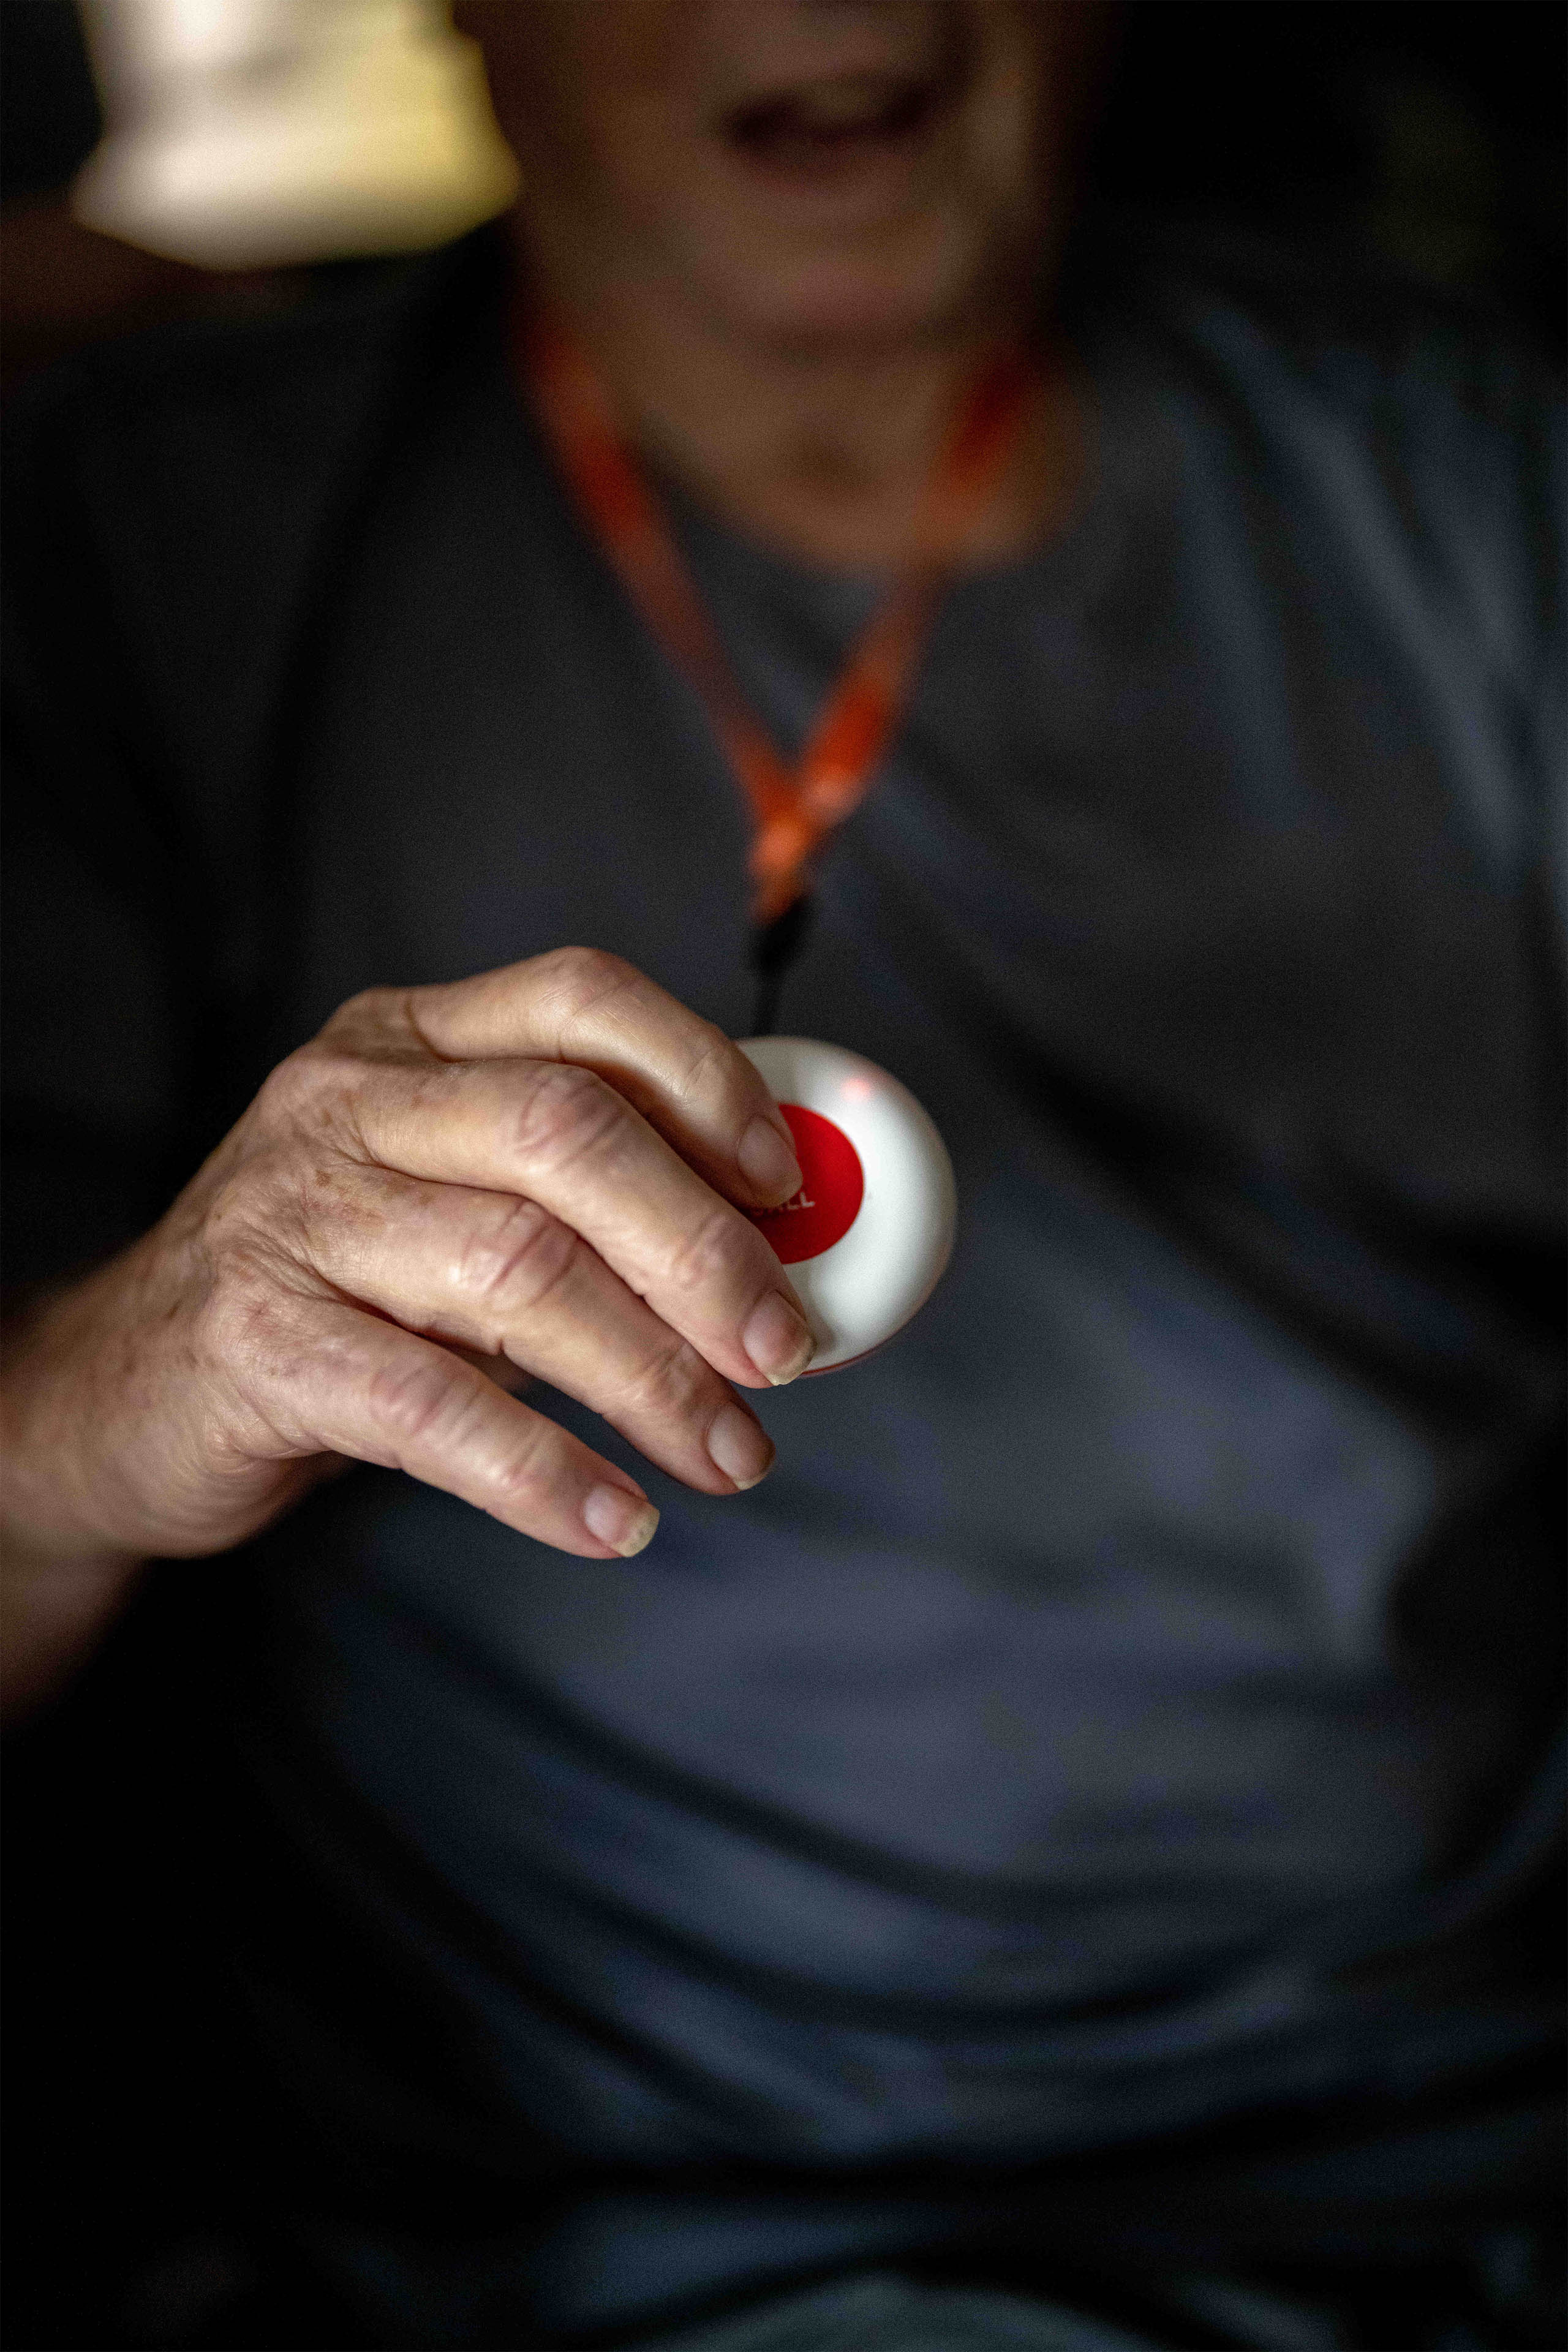 A photo of an elderly man holding up a lanyard with an emergency button on it.